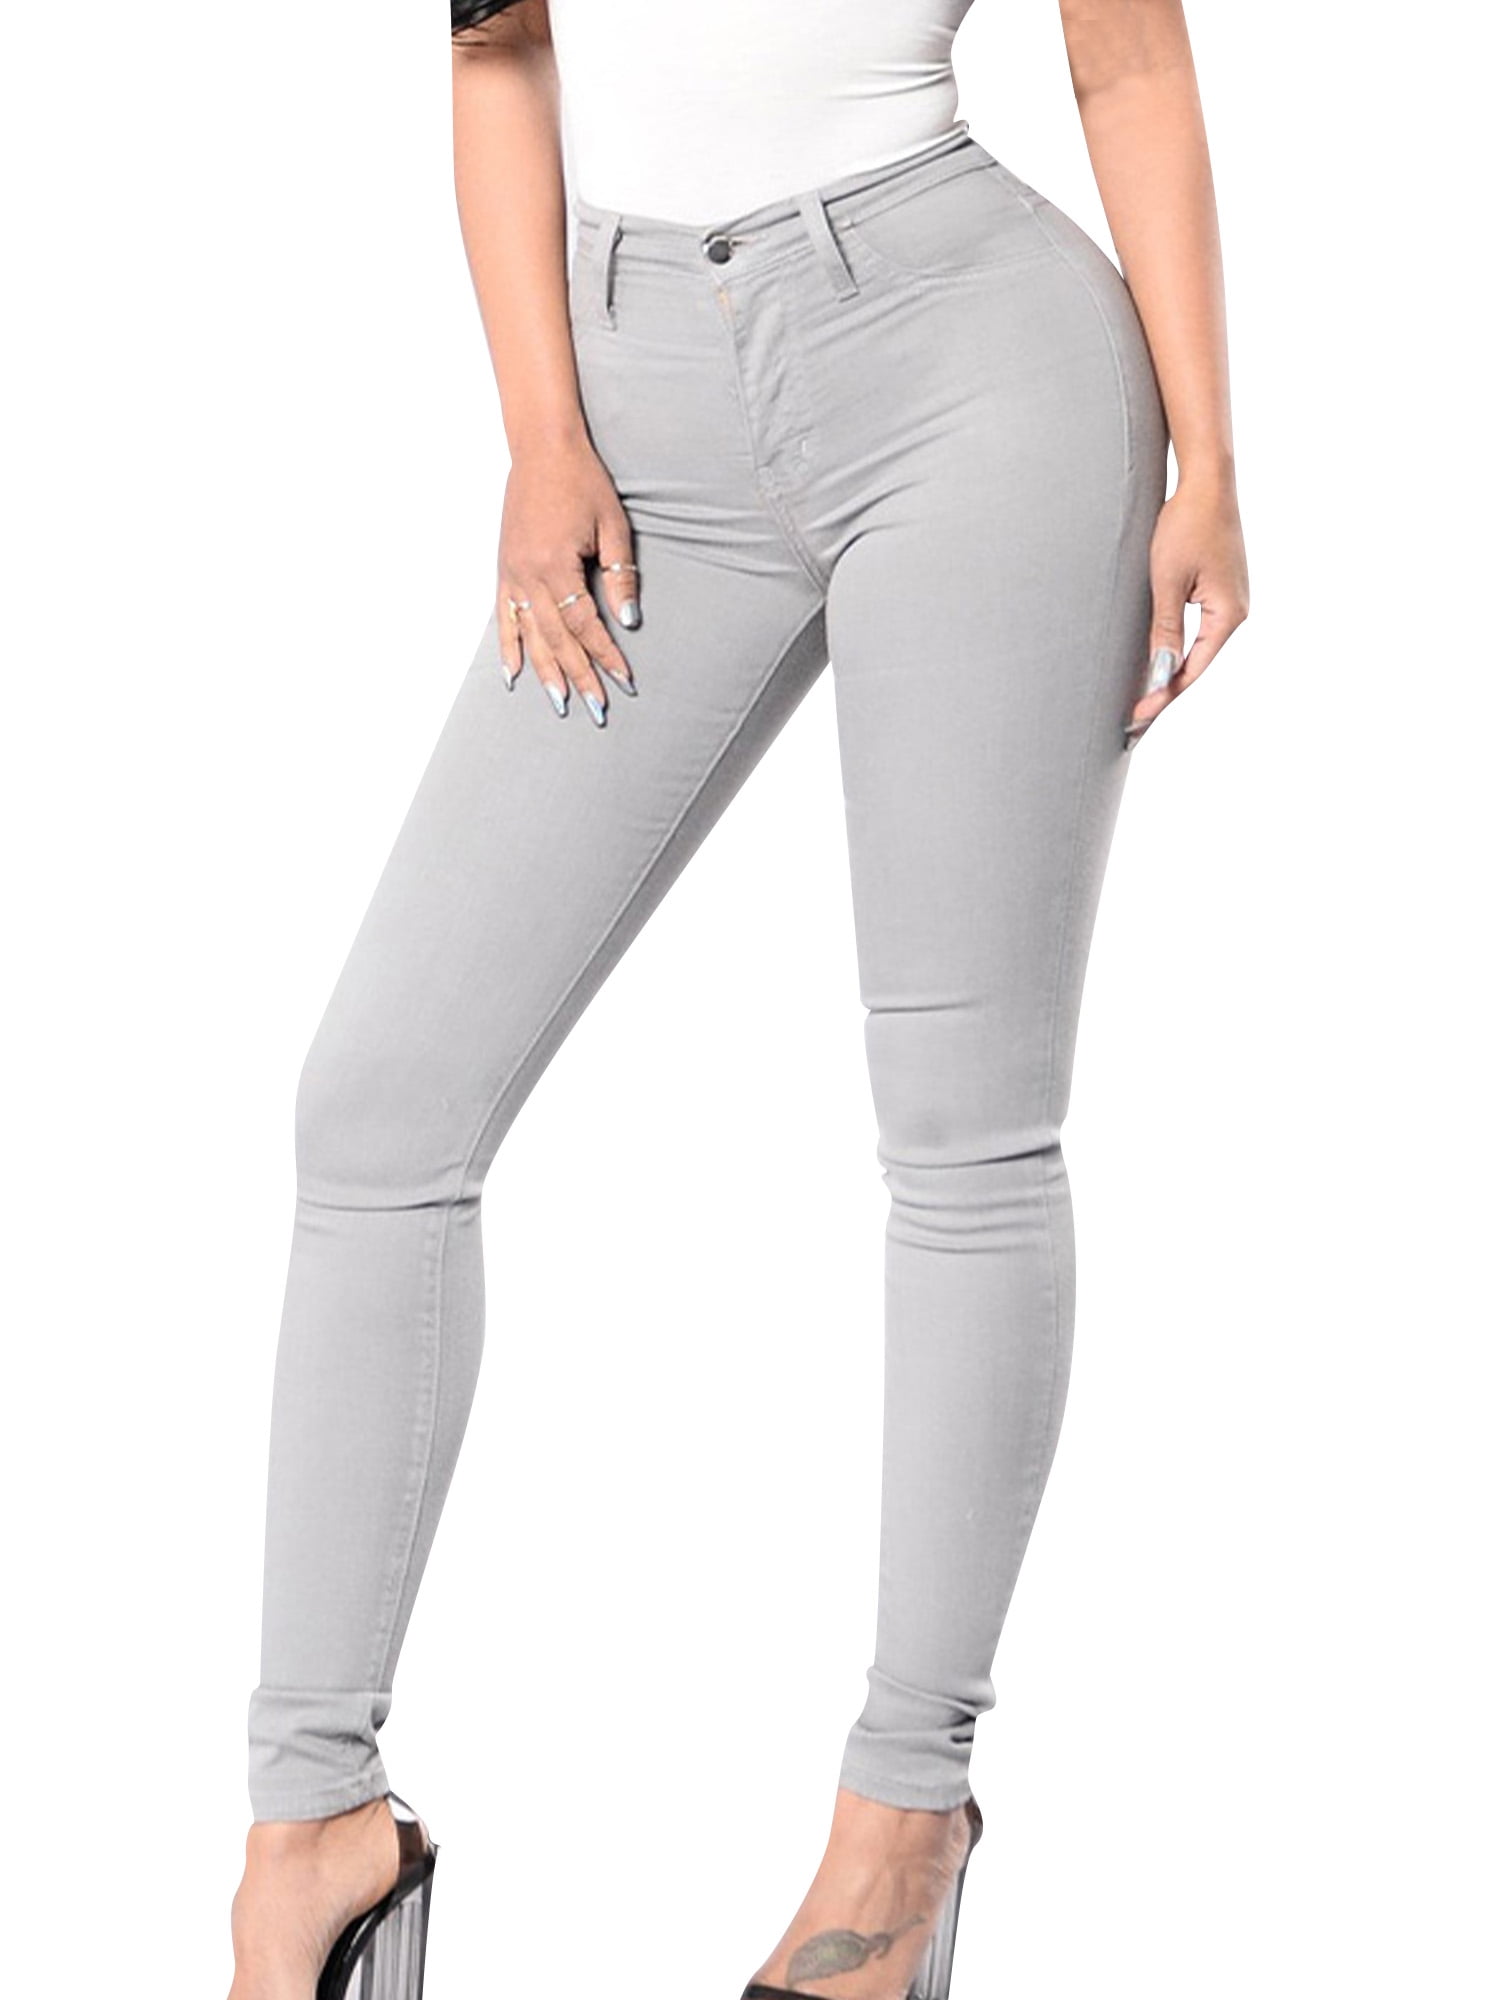 Leggings Women's Stretch Pants Ripped Cuts Skinny Sexy New AS-839